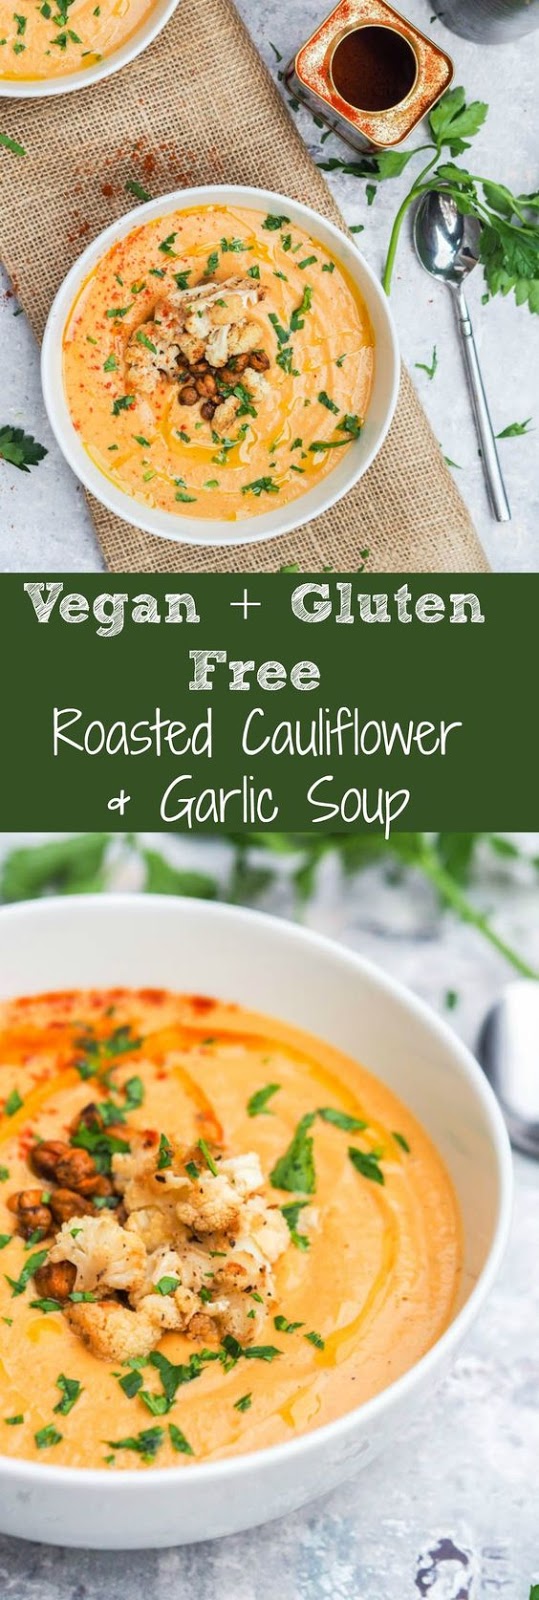 Roasted cauliflower soup is super creamy vegan soup made with roasted garlic and coconut cream. This makes for the most comforting weeknight dinner. Gluten Free too. Roasted cauliflower soup - you are my new love. You